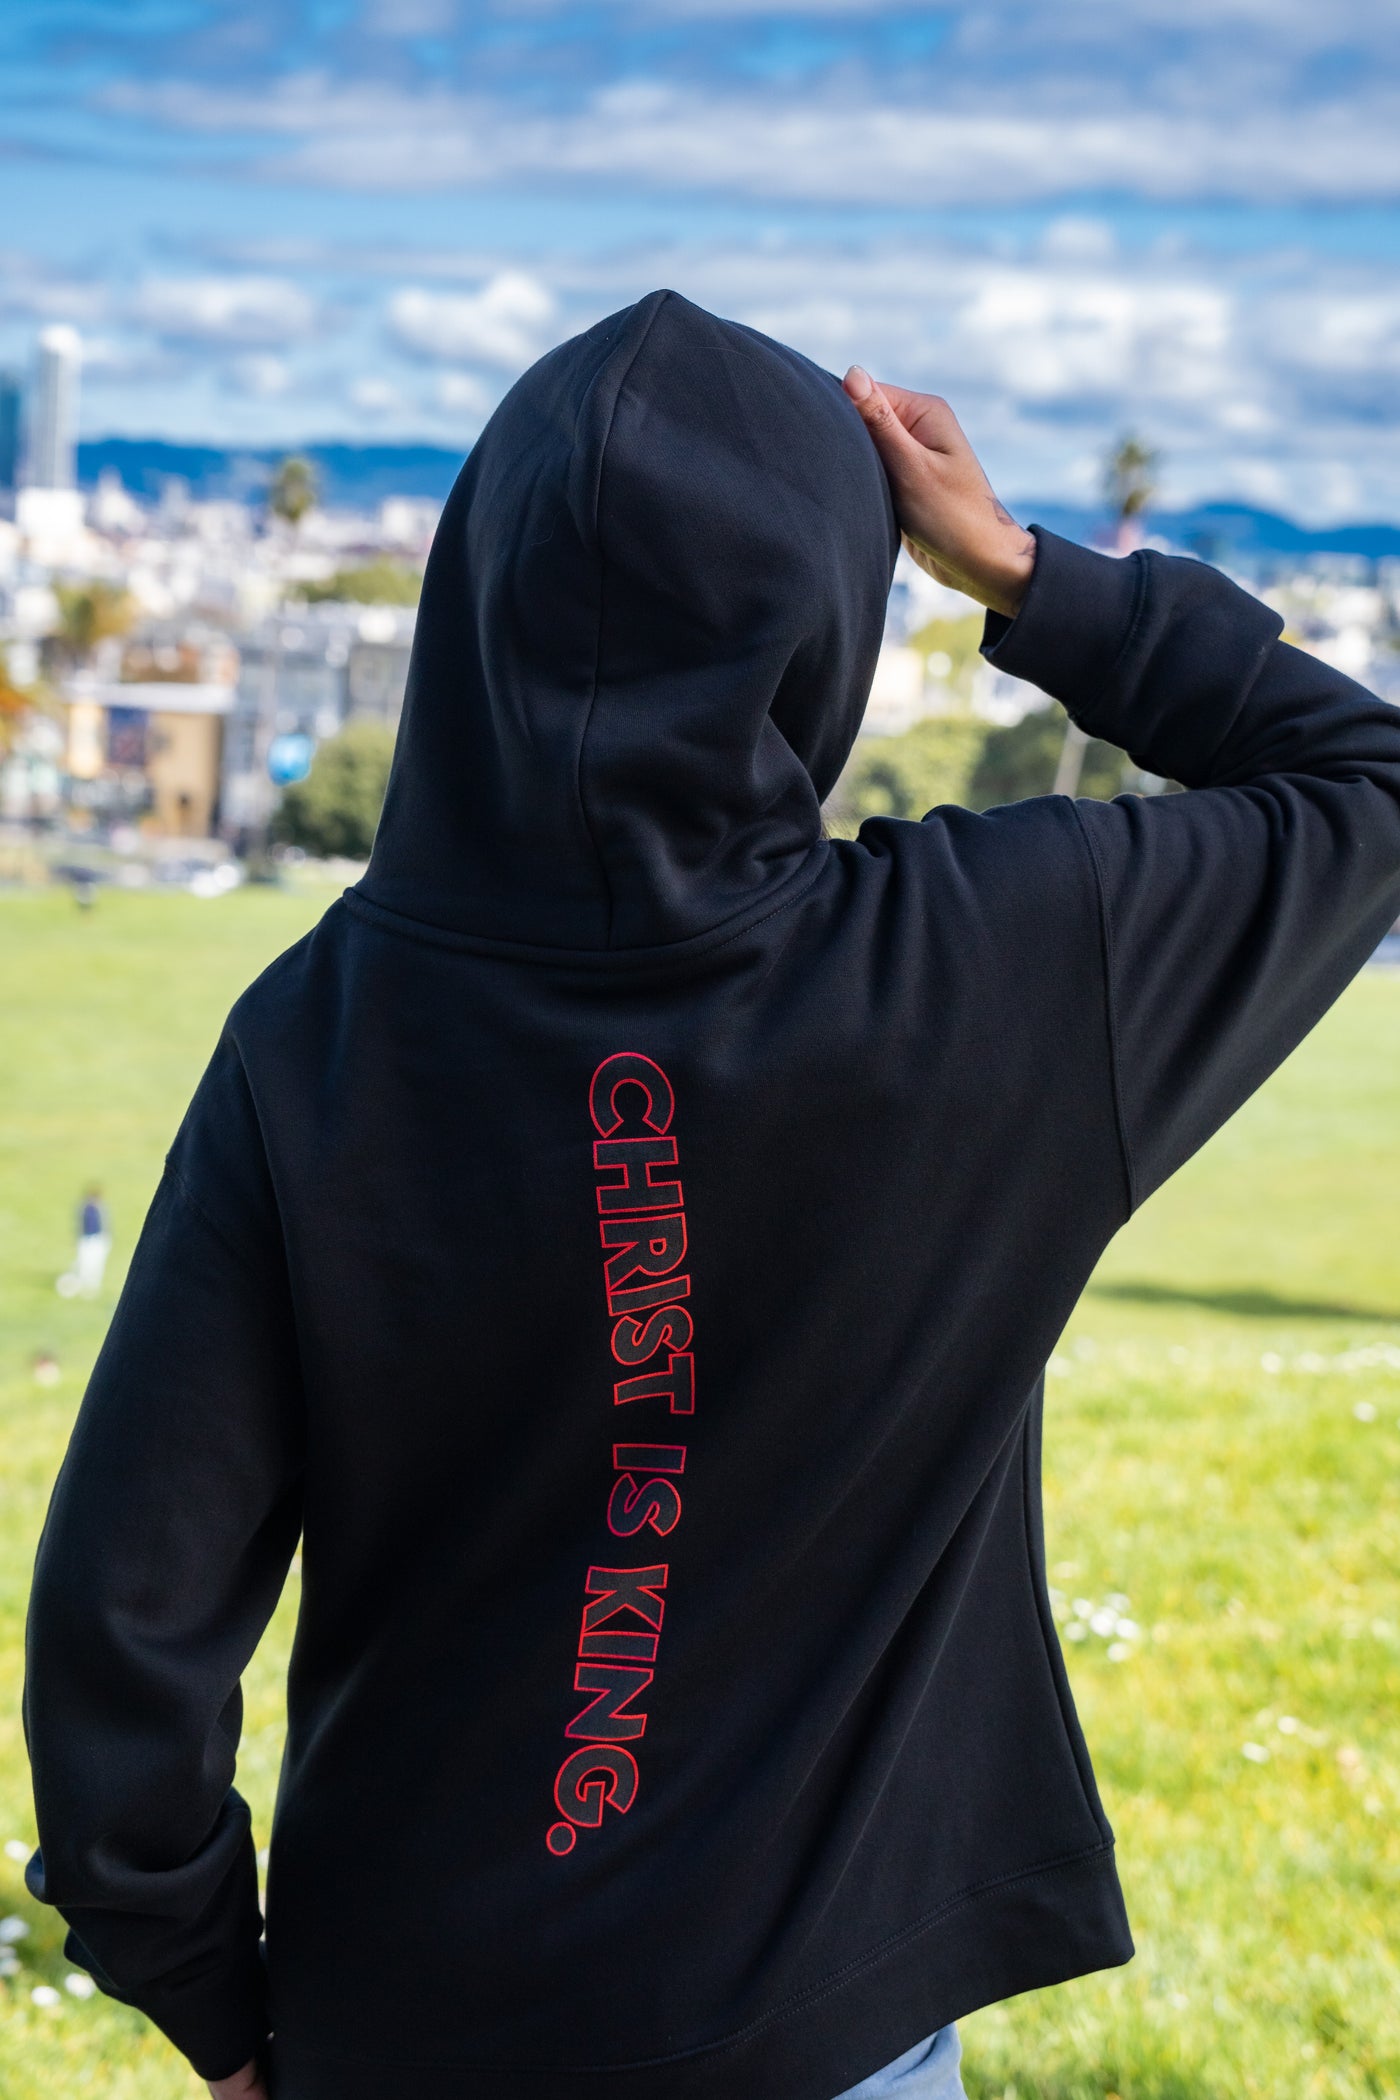 Risen Hoodie - Resurrection Sunday Special Release